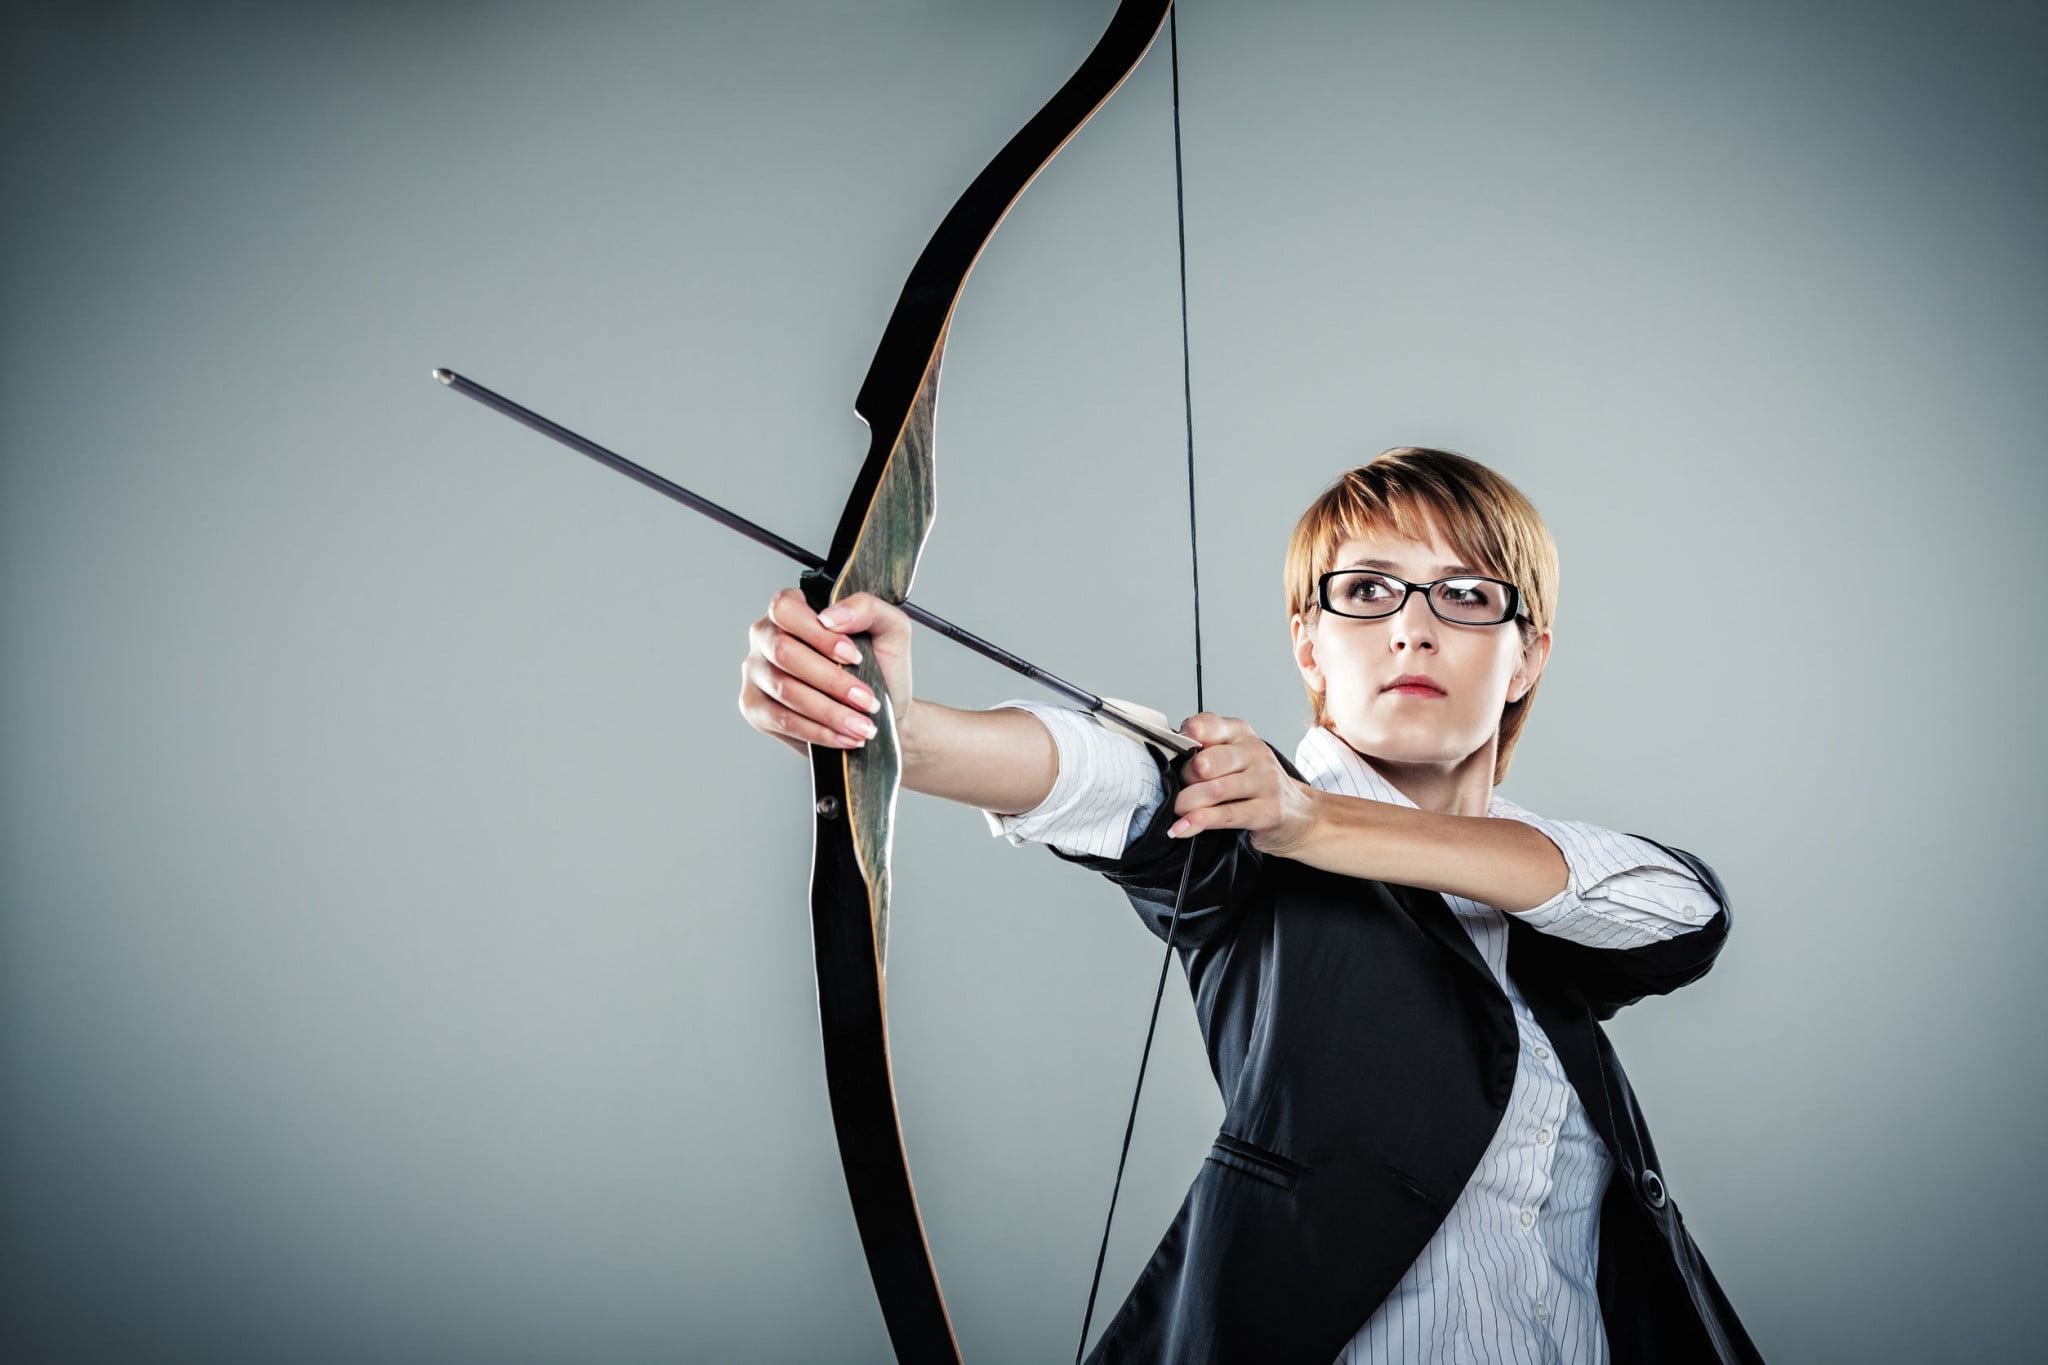 pharmacy hunger games: business woman with bow and arrow